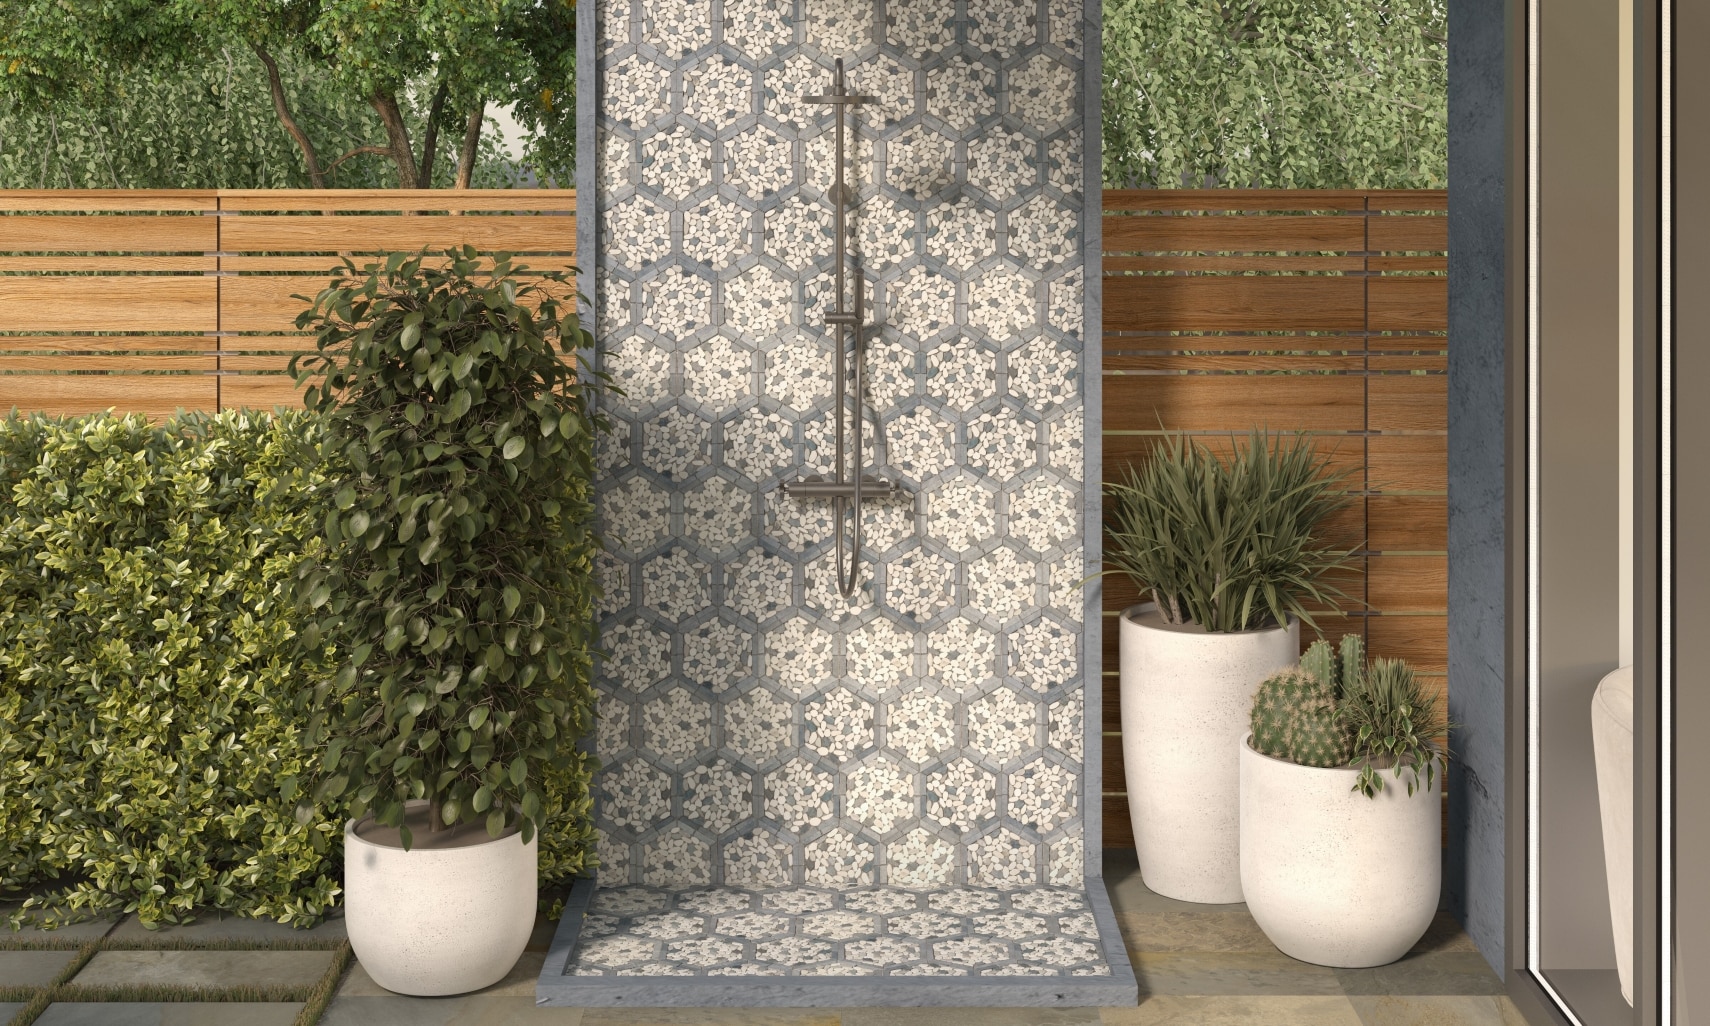 Outdoor shower wall and floor with white & beige pebble mosaic tile with gray hexagon frame, surrounded by shrubbery and potted plants.